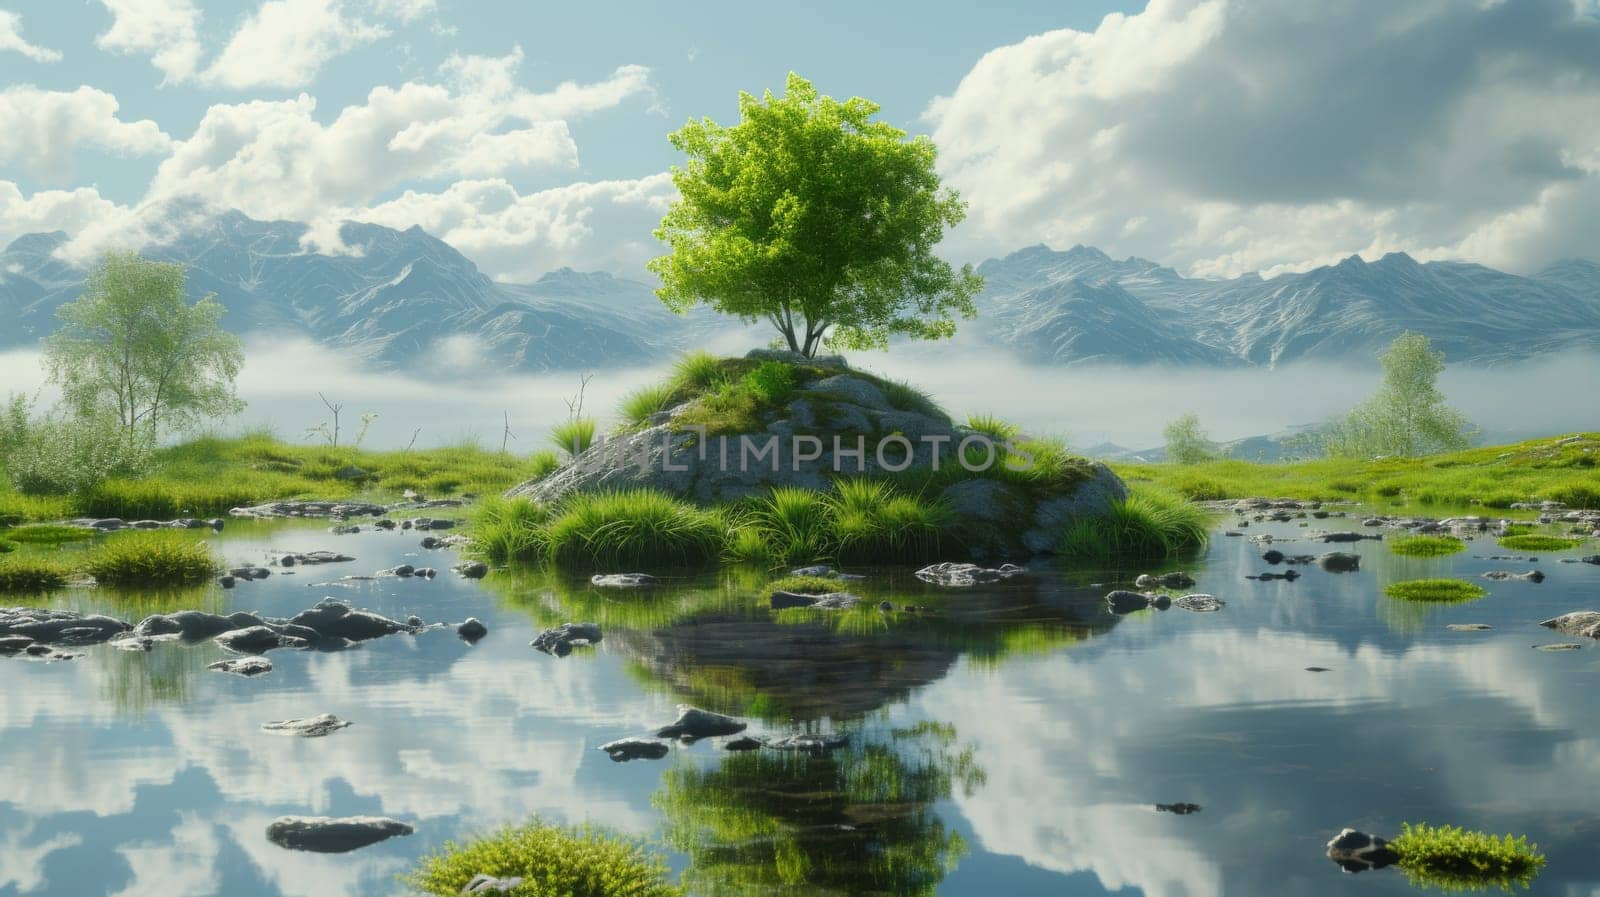 A small tree on a rock in the middle of water, AI by starush